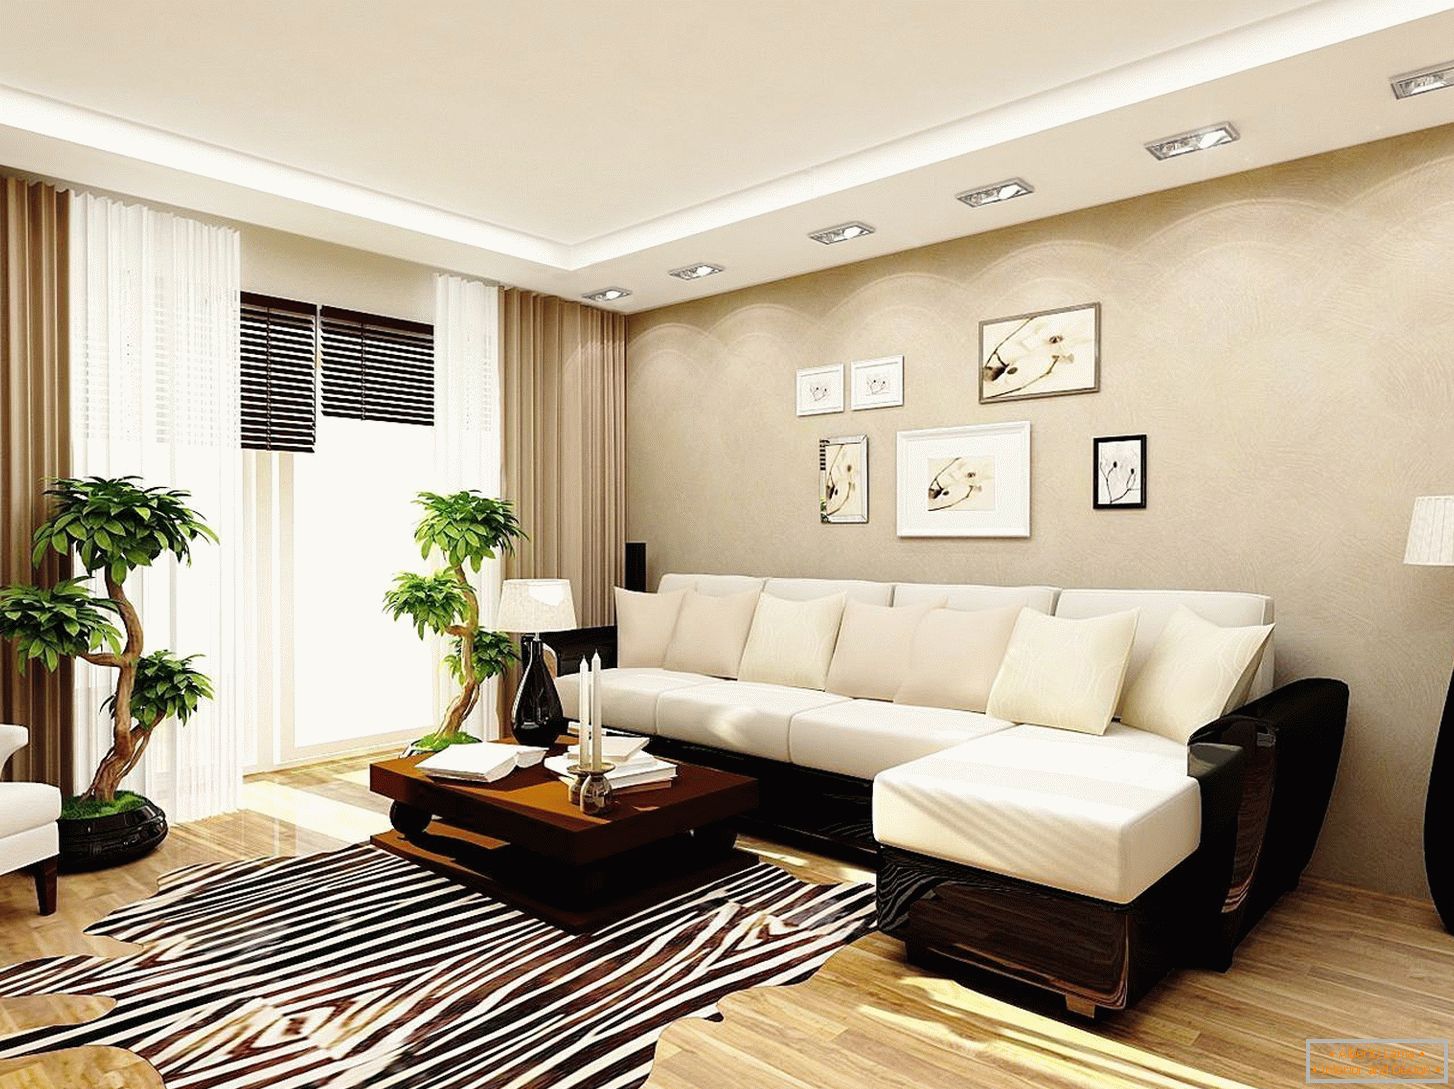 Beige color in the interior of the living room